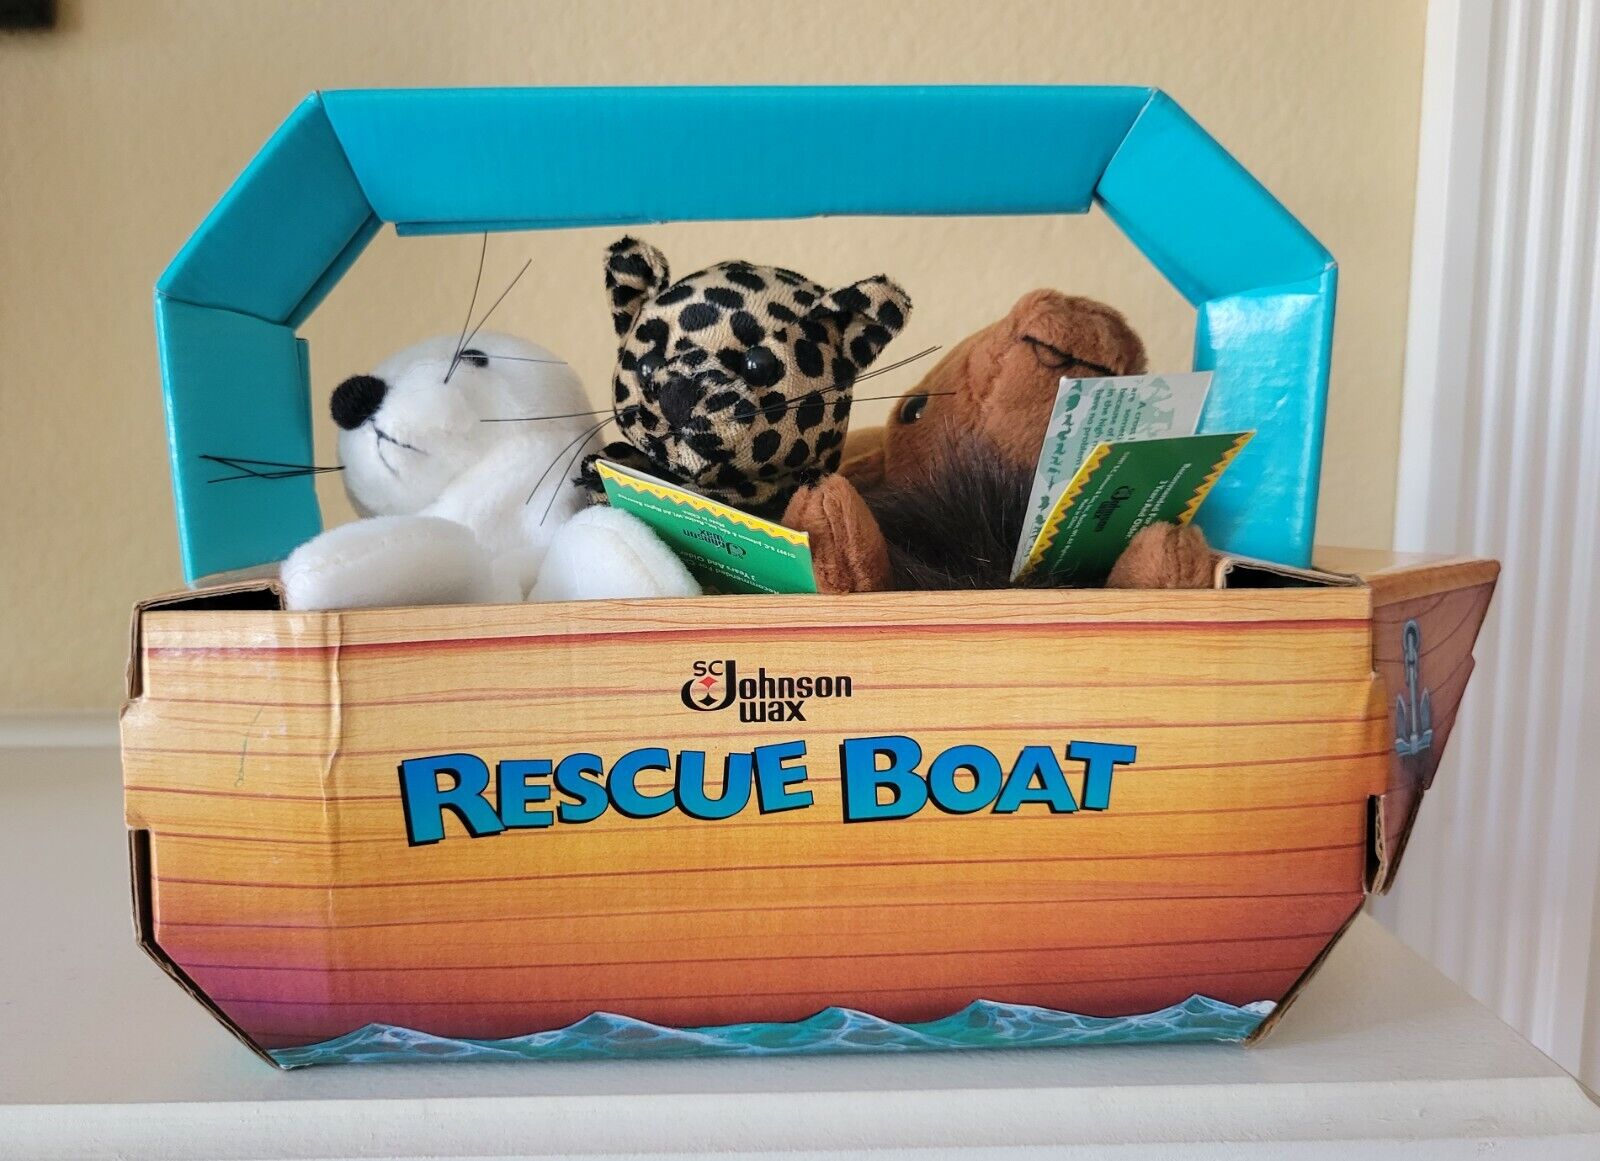 NEW 1997 Johnson Wax Rescue Boat With 3 Fragile Friends 